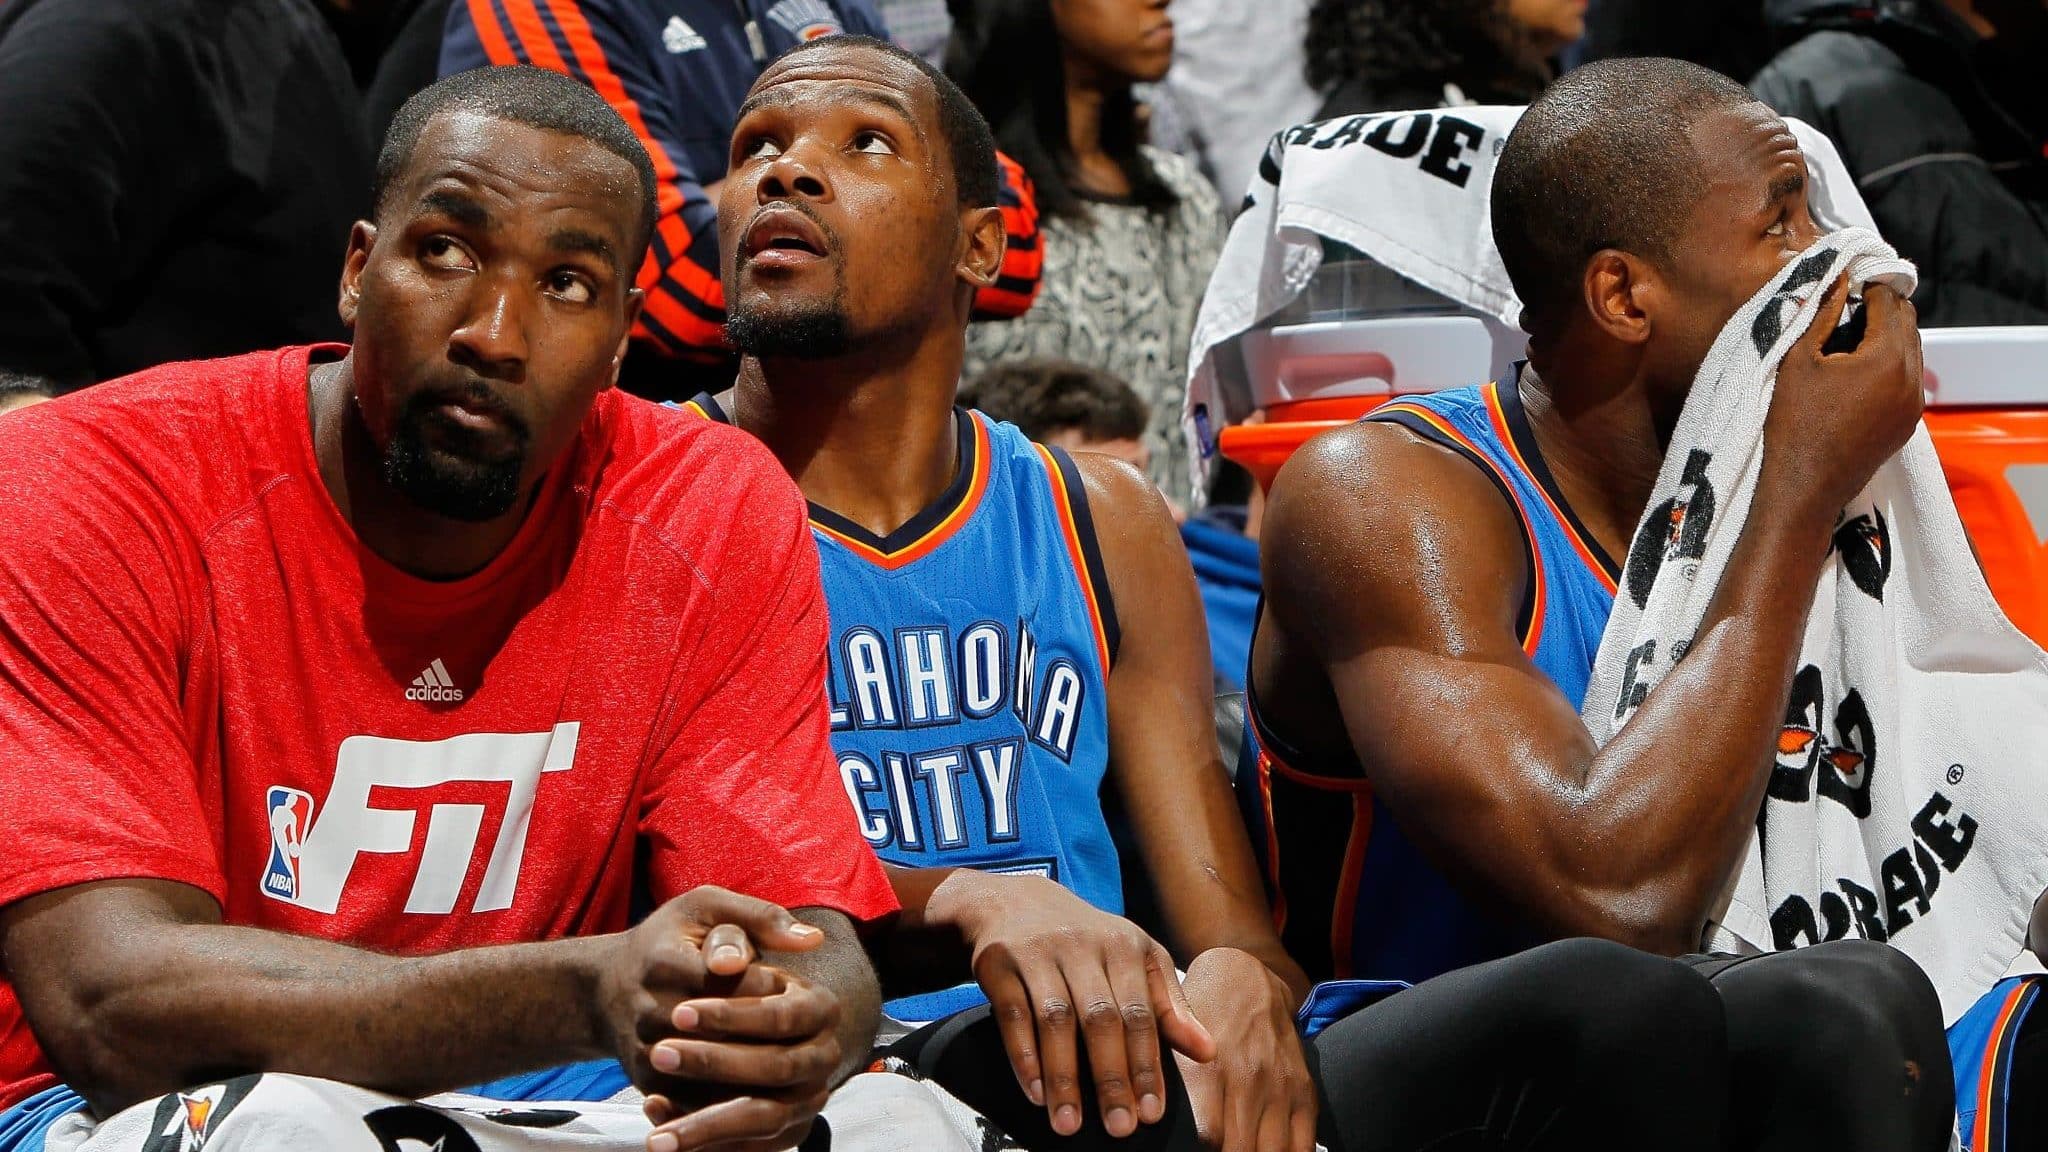 ATLANTA, GA - JANUARY 23: Kendrick Perkins #5, Kevin Durant #35 and Serge Ibaka #9 of the Oklahoma City Thunder sit in the final seconds of their 103-93 loss to the Atlanta Hawks at Philips Arena on January 23, 2015 in Atlanta, Georgia. NOTE TO USER: User expressly acknowledges and agrees that, by downloading and or using this photograph, User is consenting to the terms and conditions of the Getty Images License Agreement.